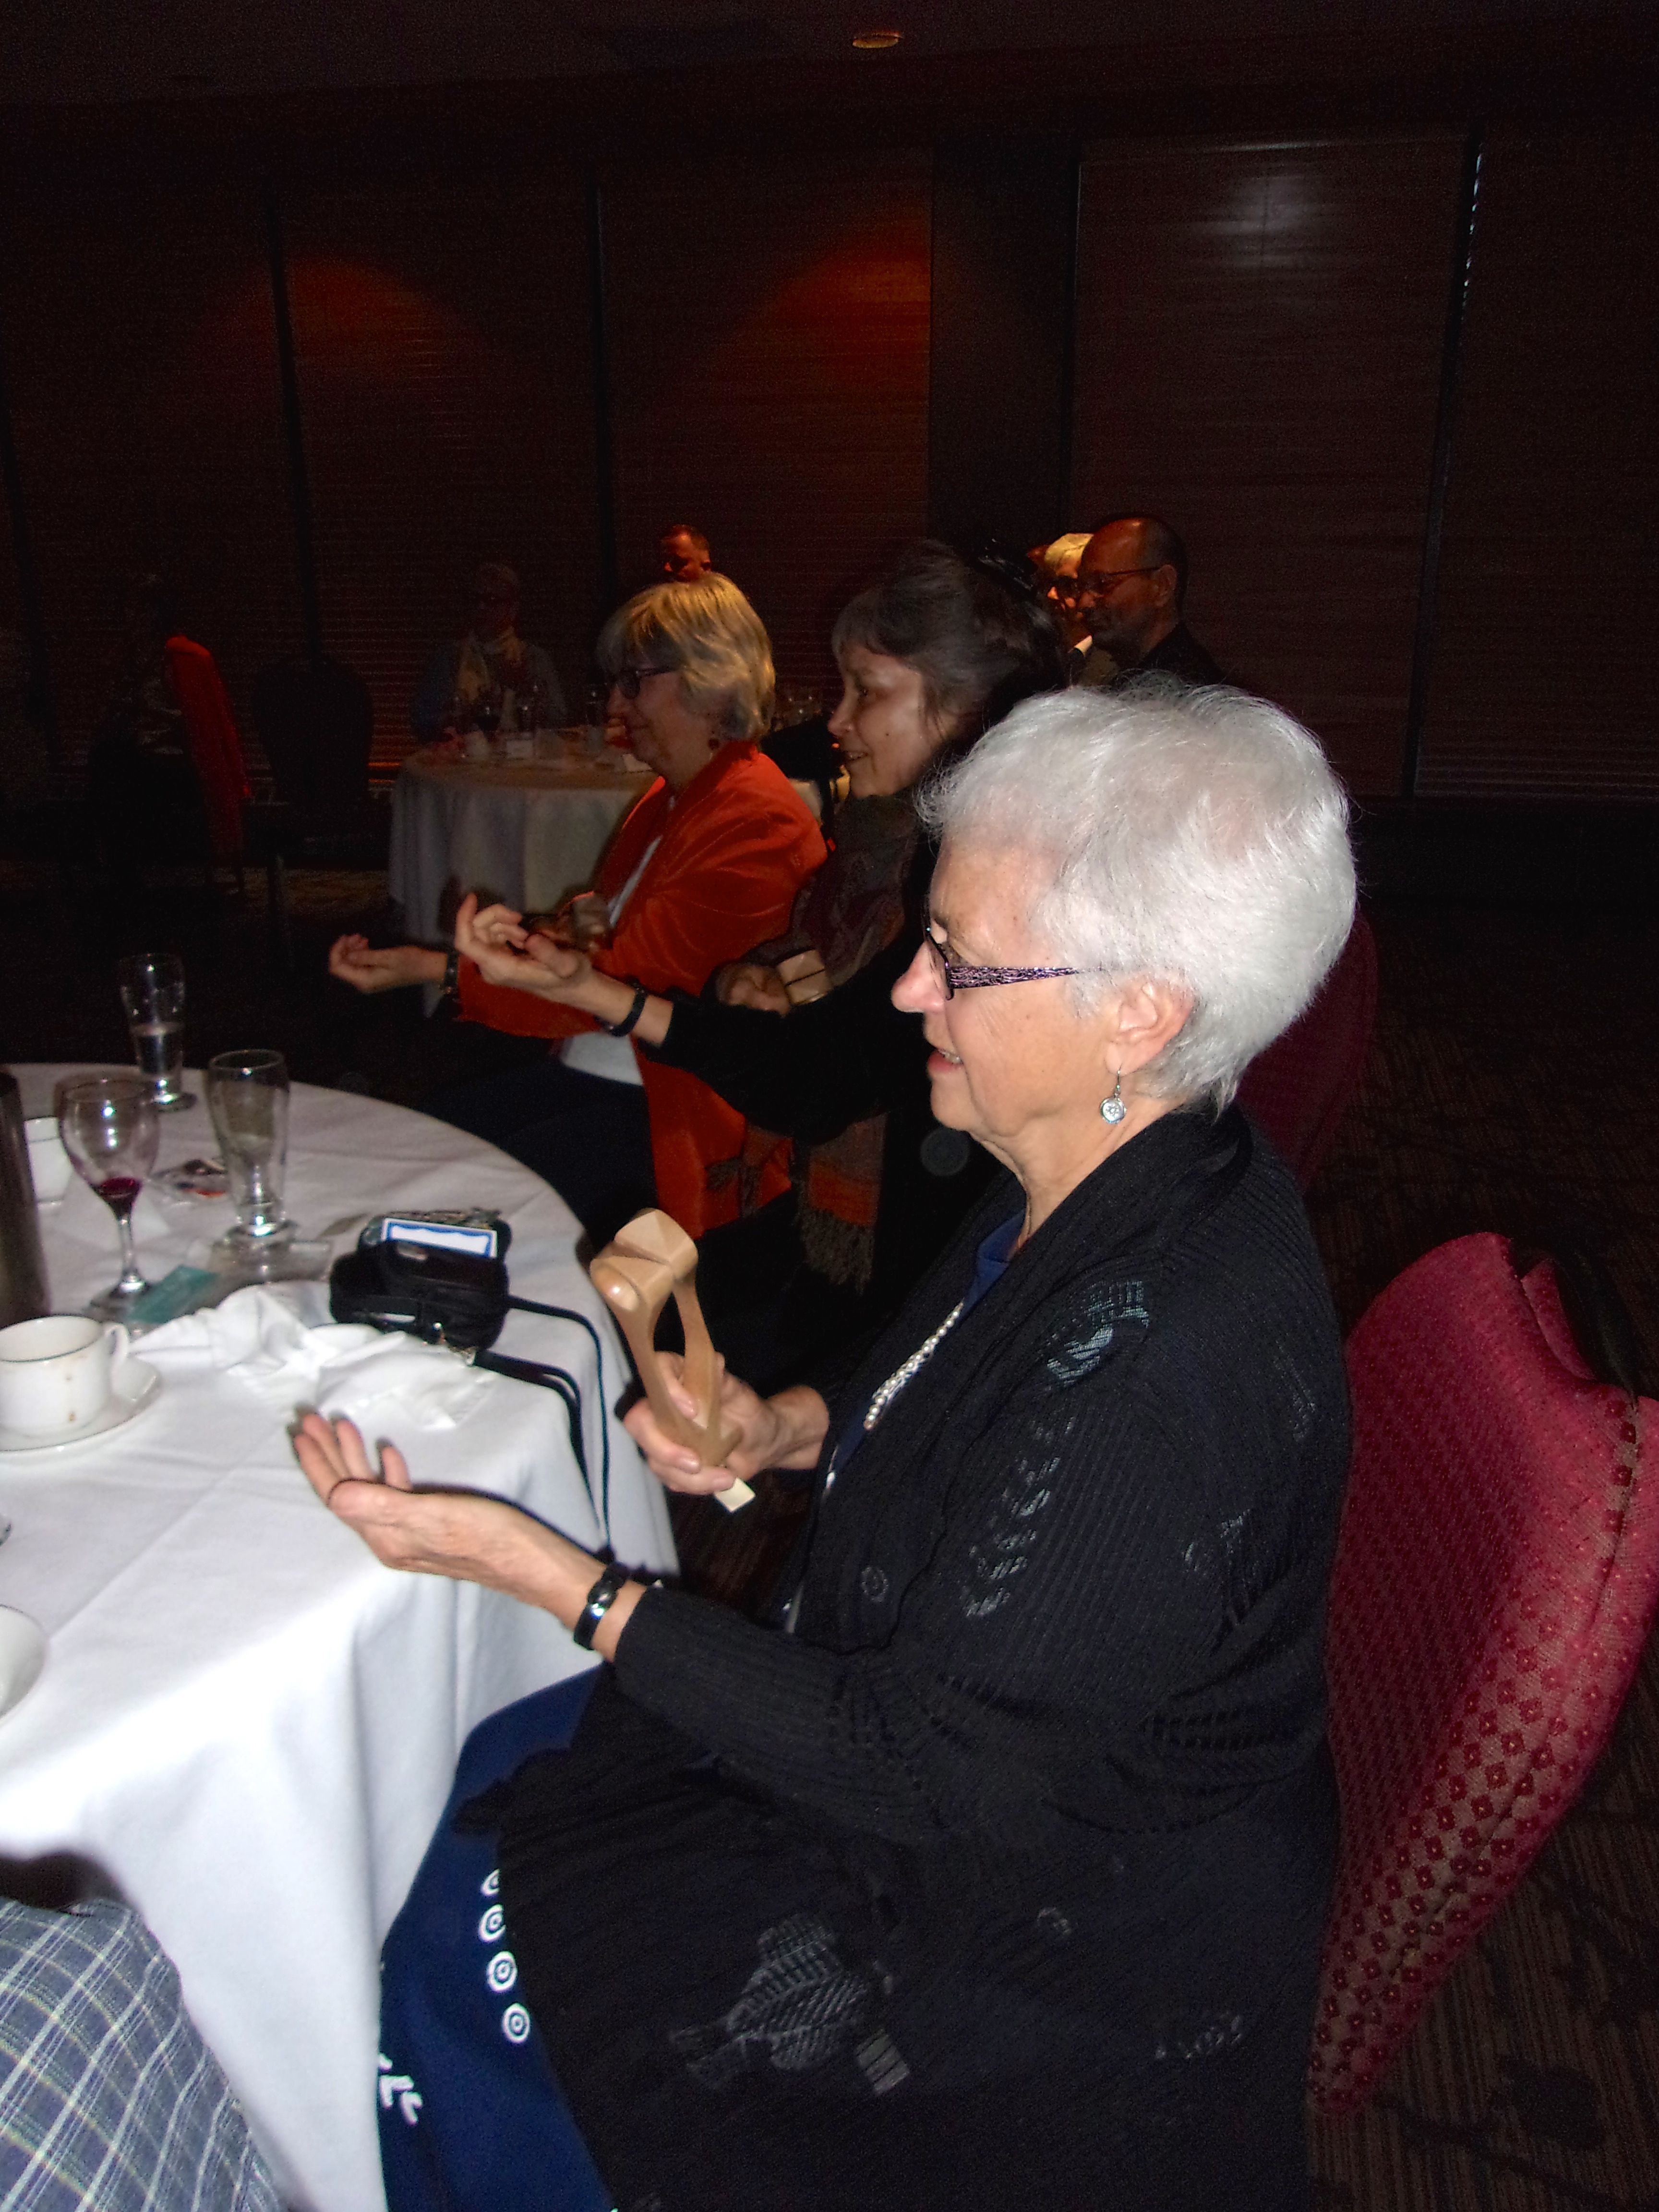 Banquet – Marilyn Conroy Playing Spoons